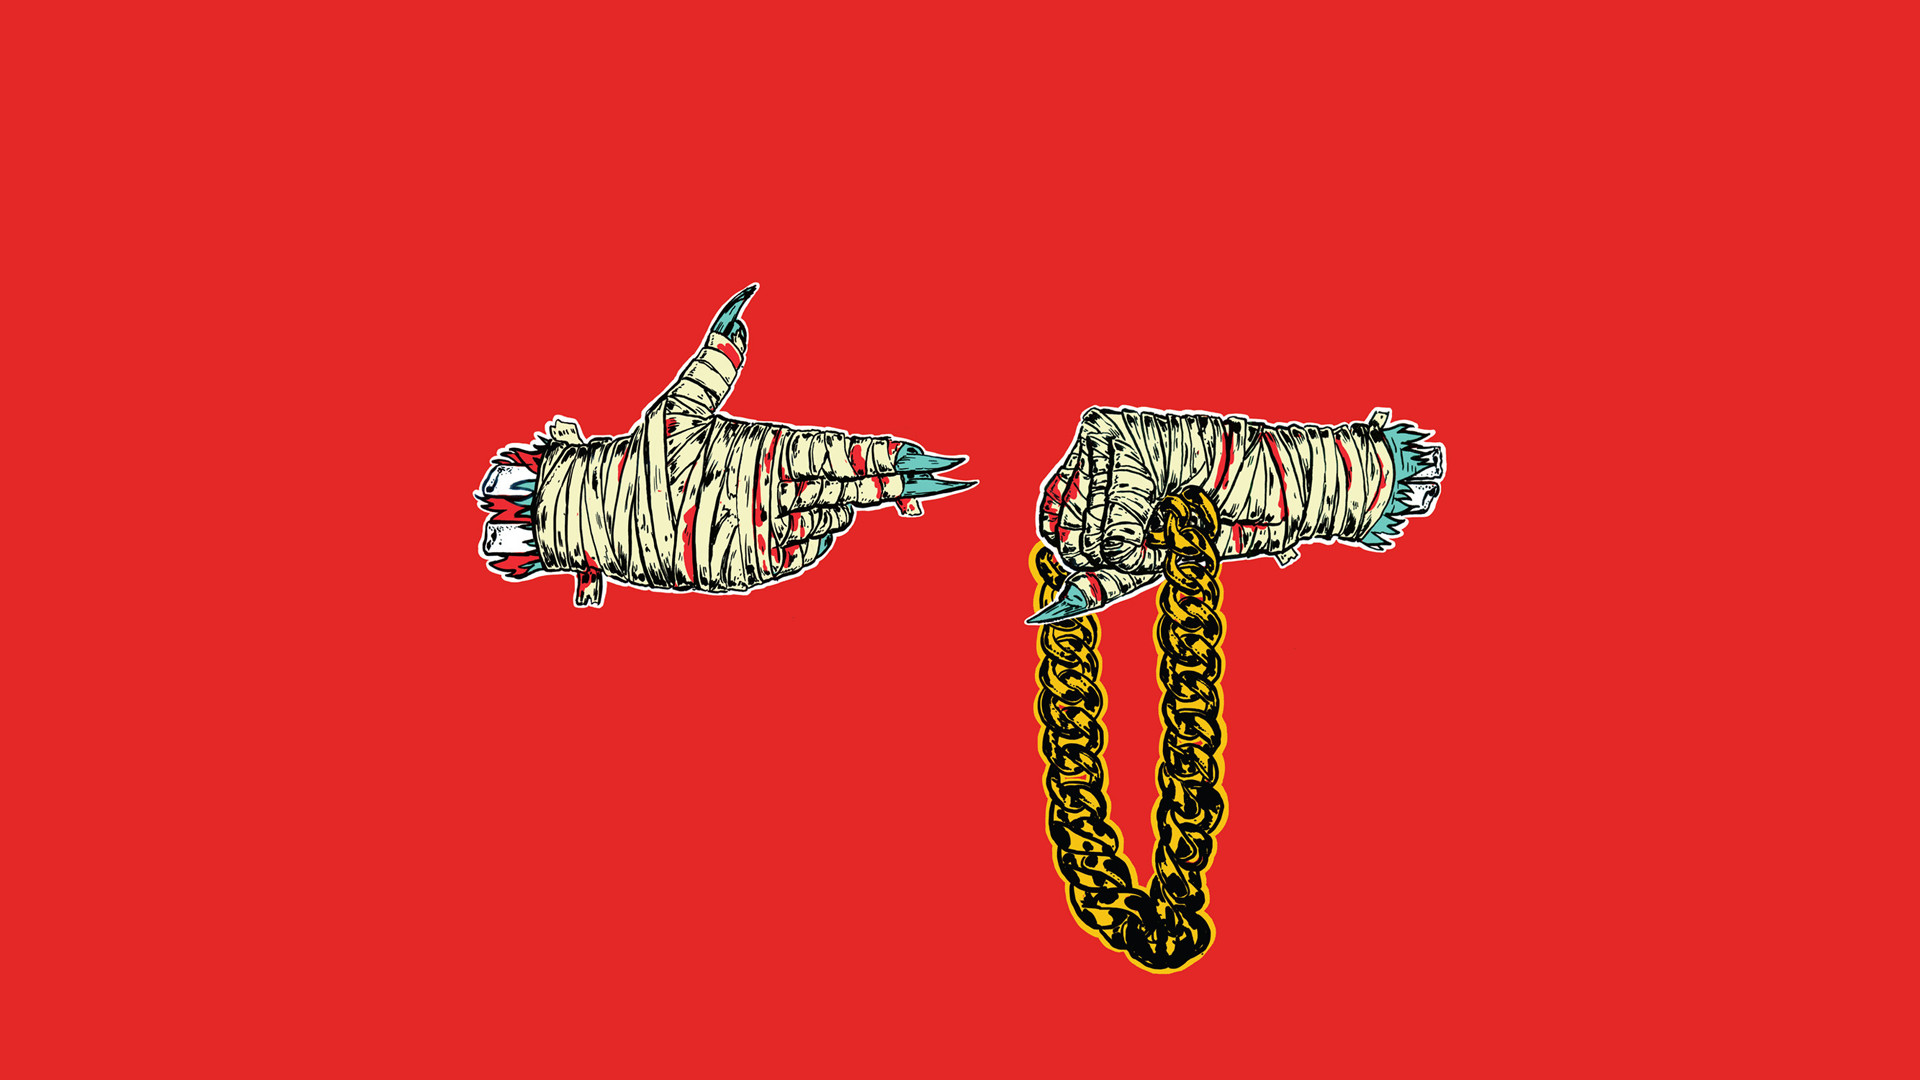 1920x1080 Search Results for “run the jewels phone wallpaper” – Adorable Wallpapers